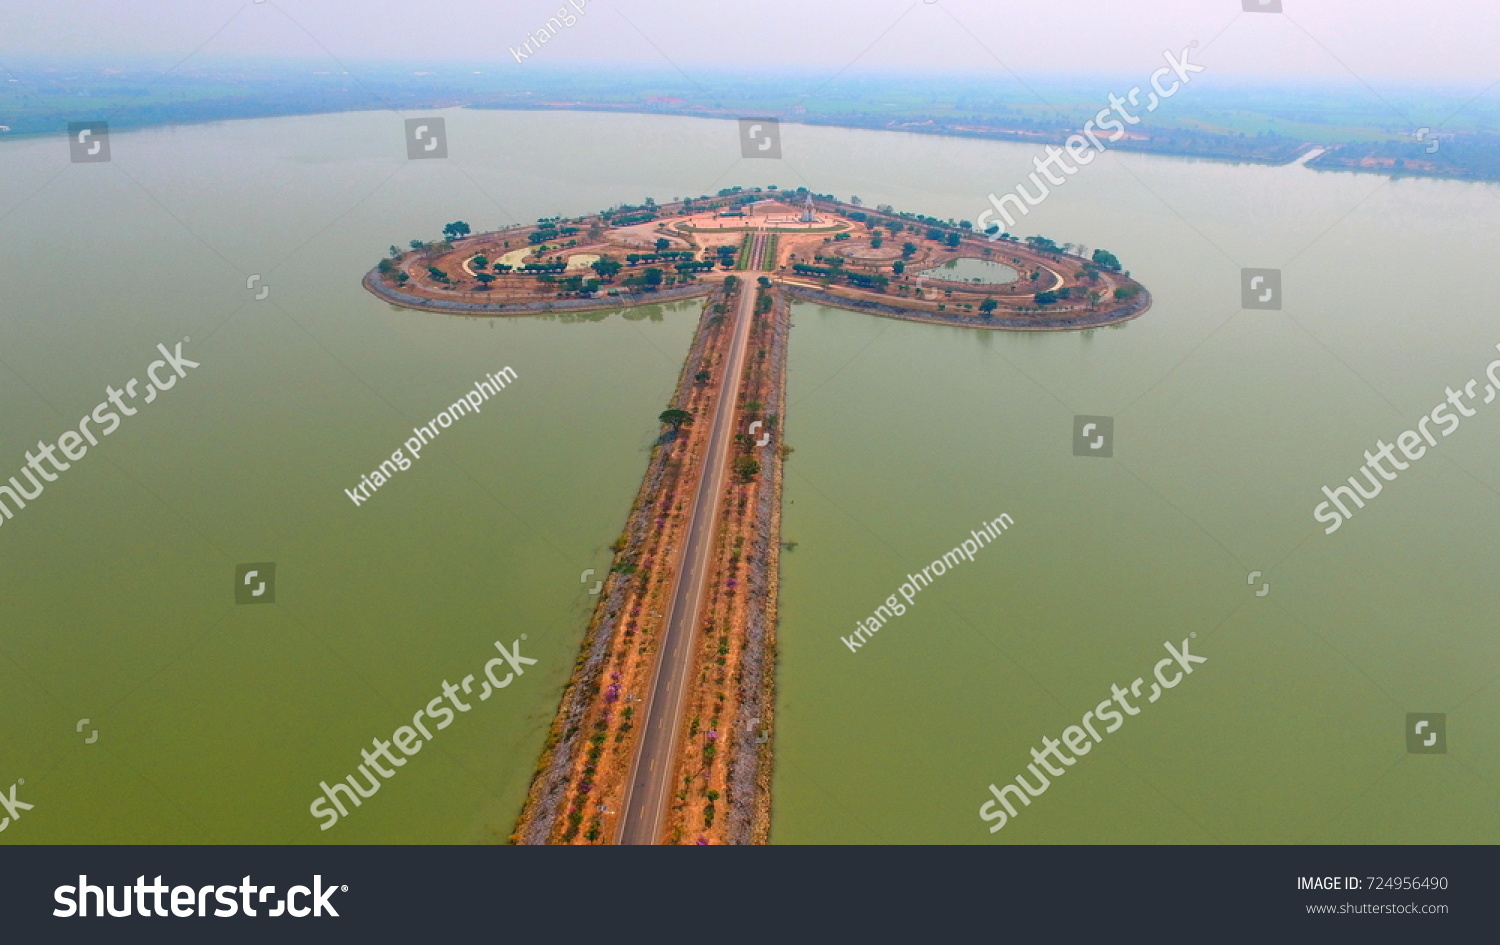 High angle view of Thung Thalay Luang or the heart-shaped lake in Sukhothai ,Thailand
 #724956490